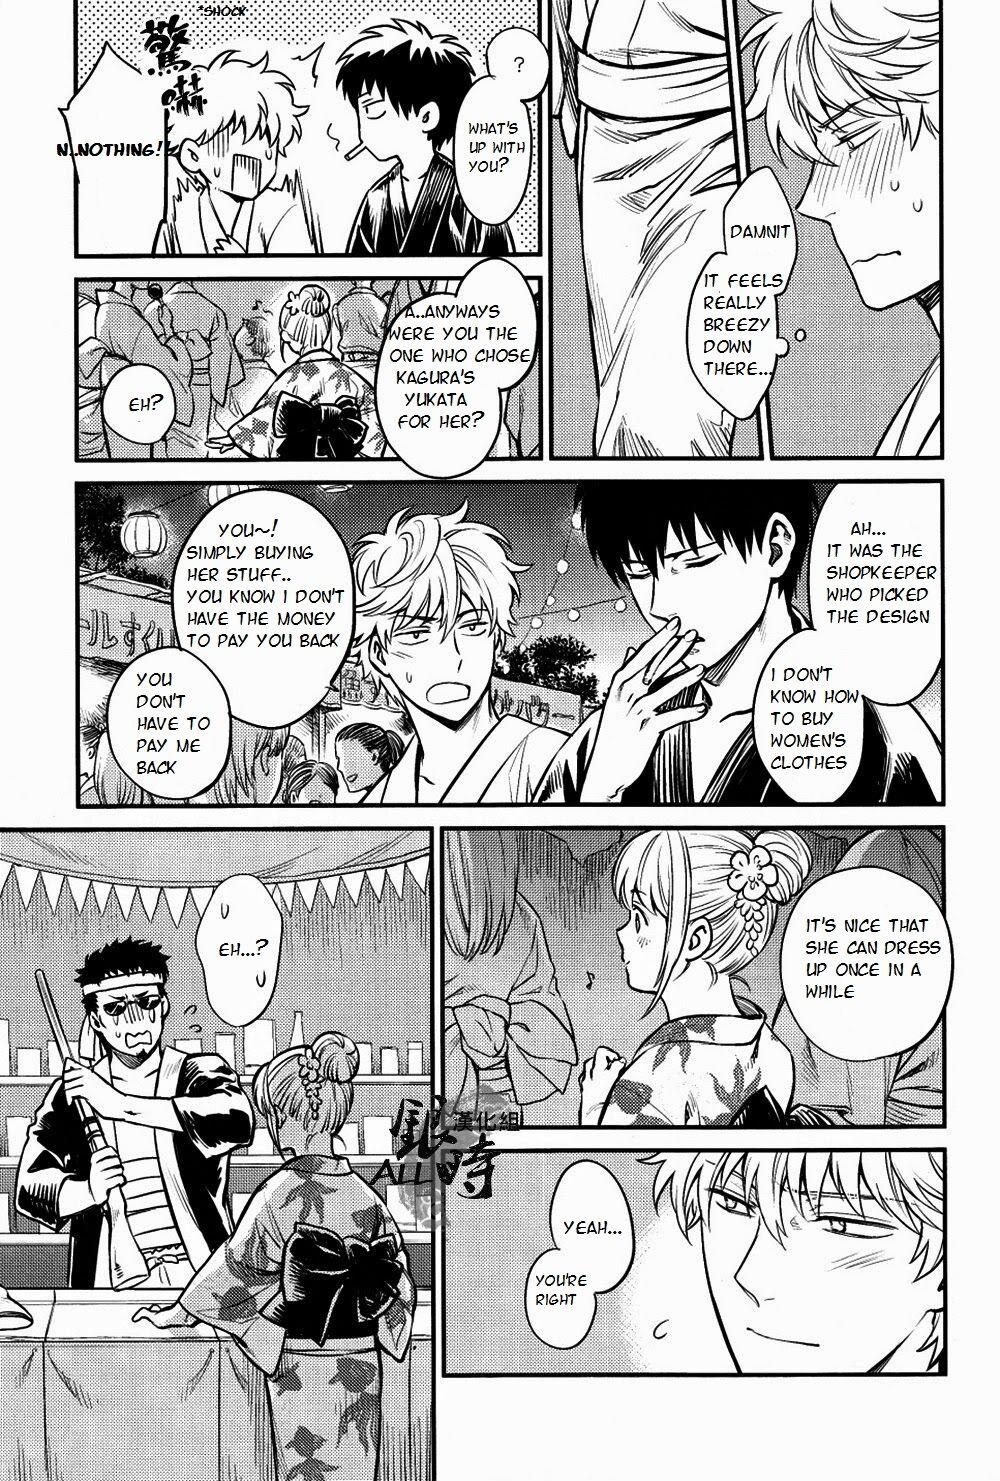 Swinger Please! Gintoki - Gintama And - Page 10